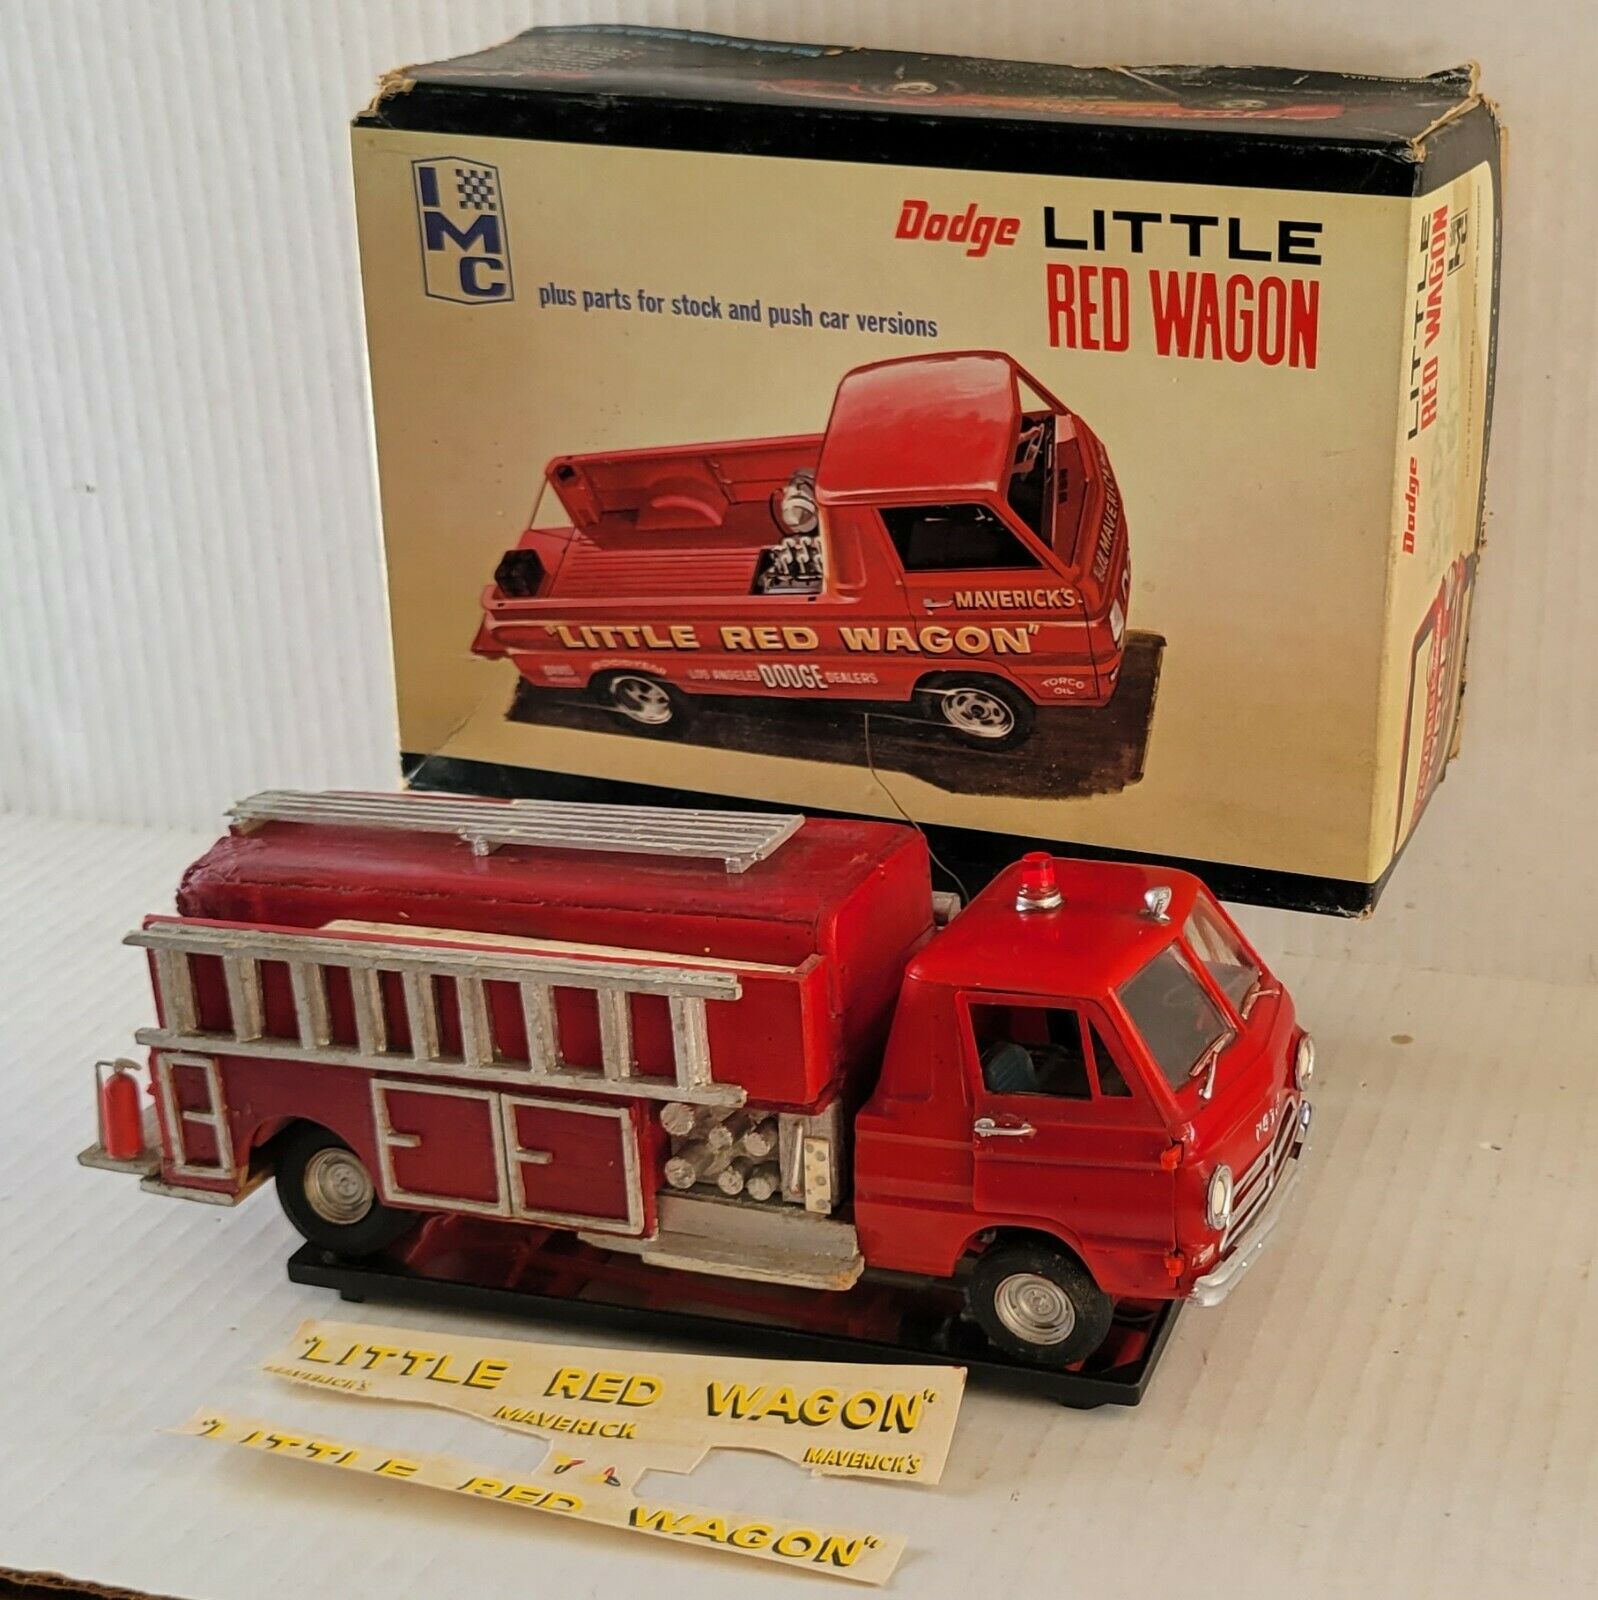 Vintage Imc Dodge Fire Engine Customized Little Red Wagon Truck Box Decals Toy